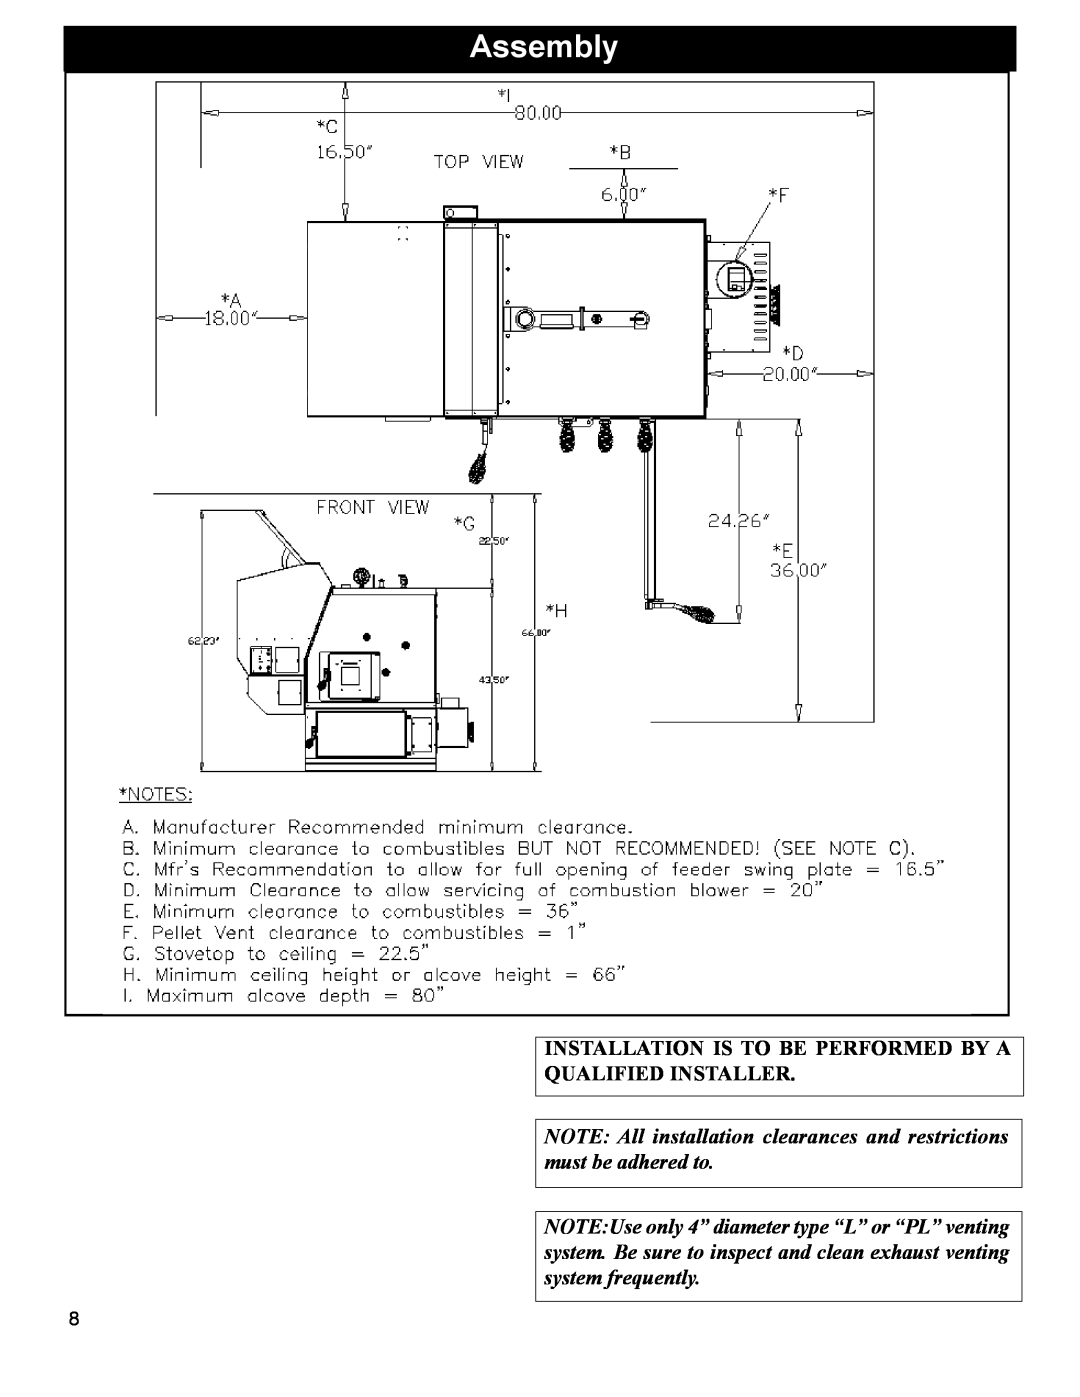 Hearth and Home Technologies BH 105 manual Assembly, Installation Is To Be Performed By A Qualified Installer 